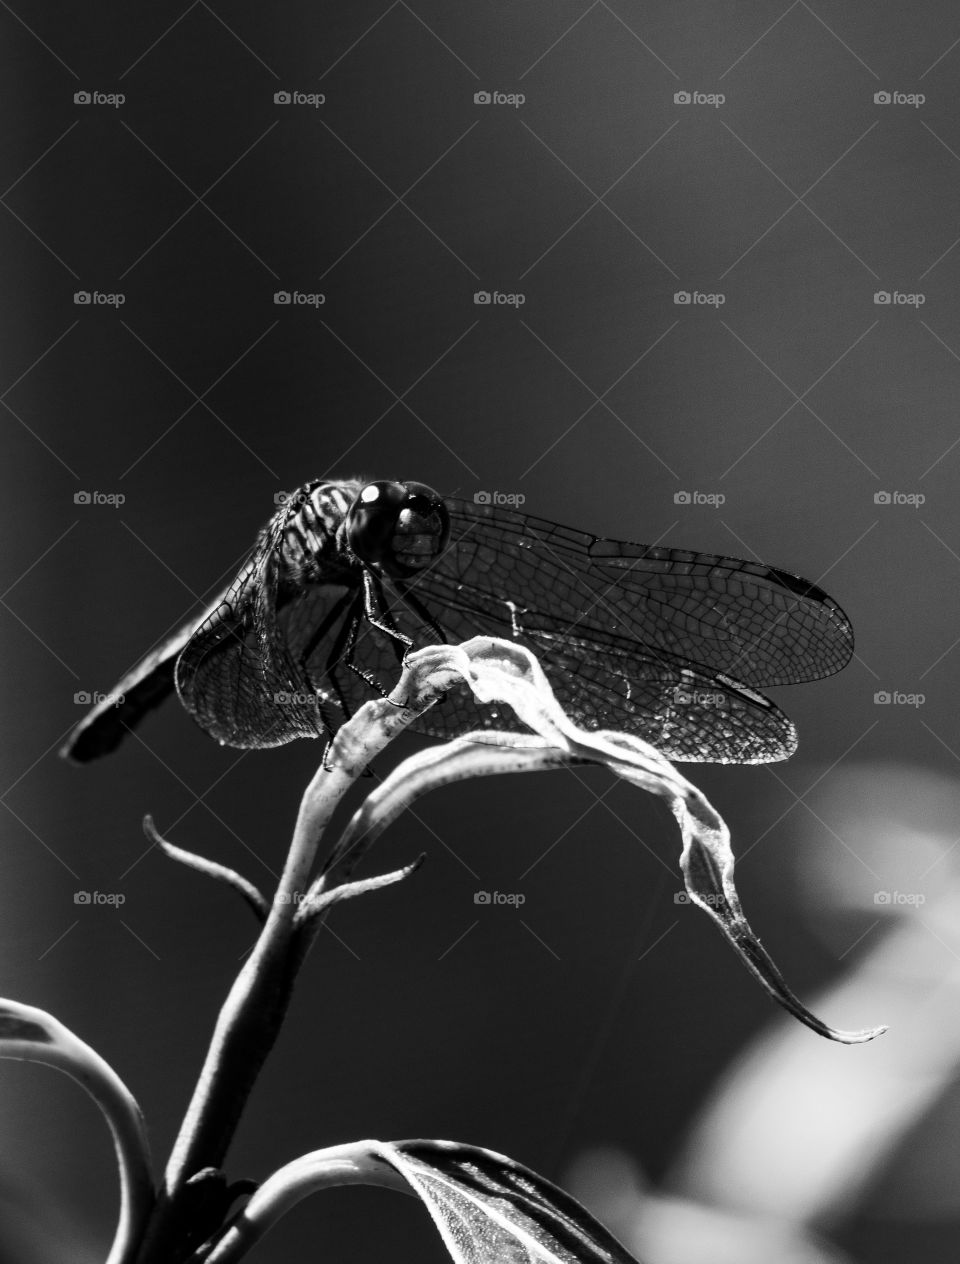 B&W dragon fly picture